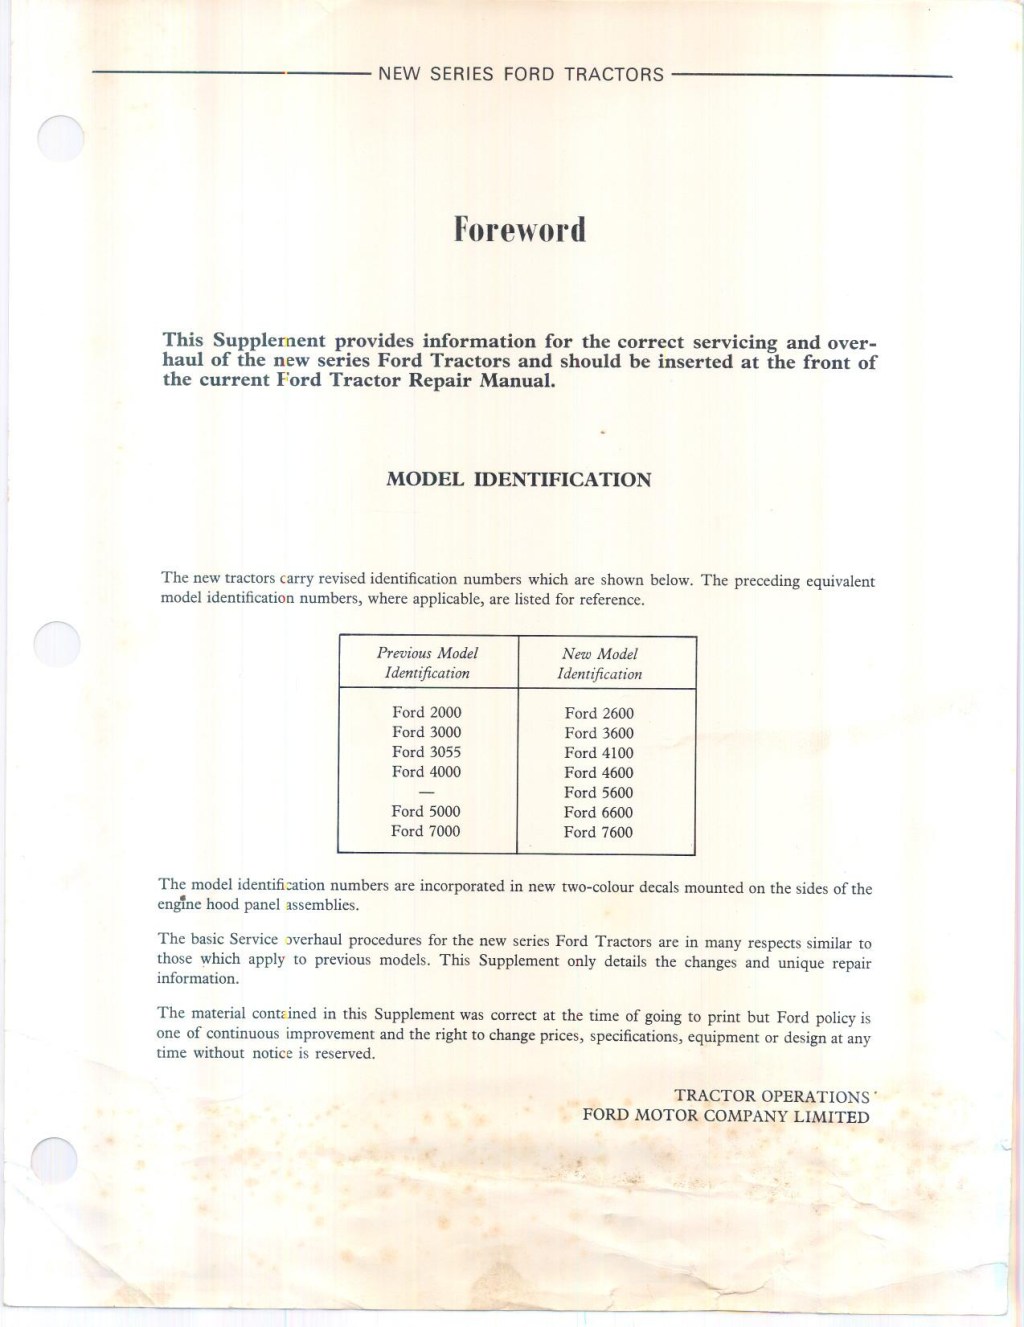 Picture of: Ford  Tractor Service Repair Manual by kmdisbnvmk – Issuu